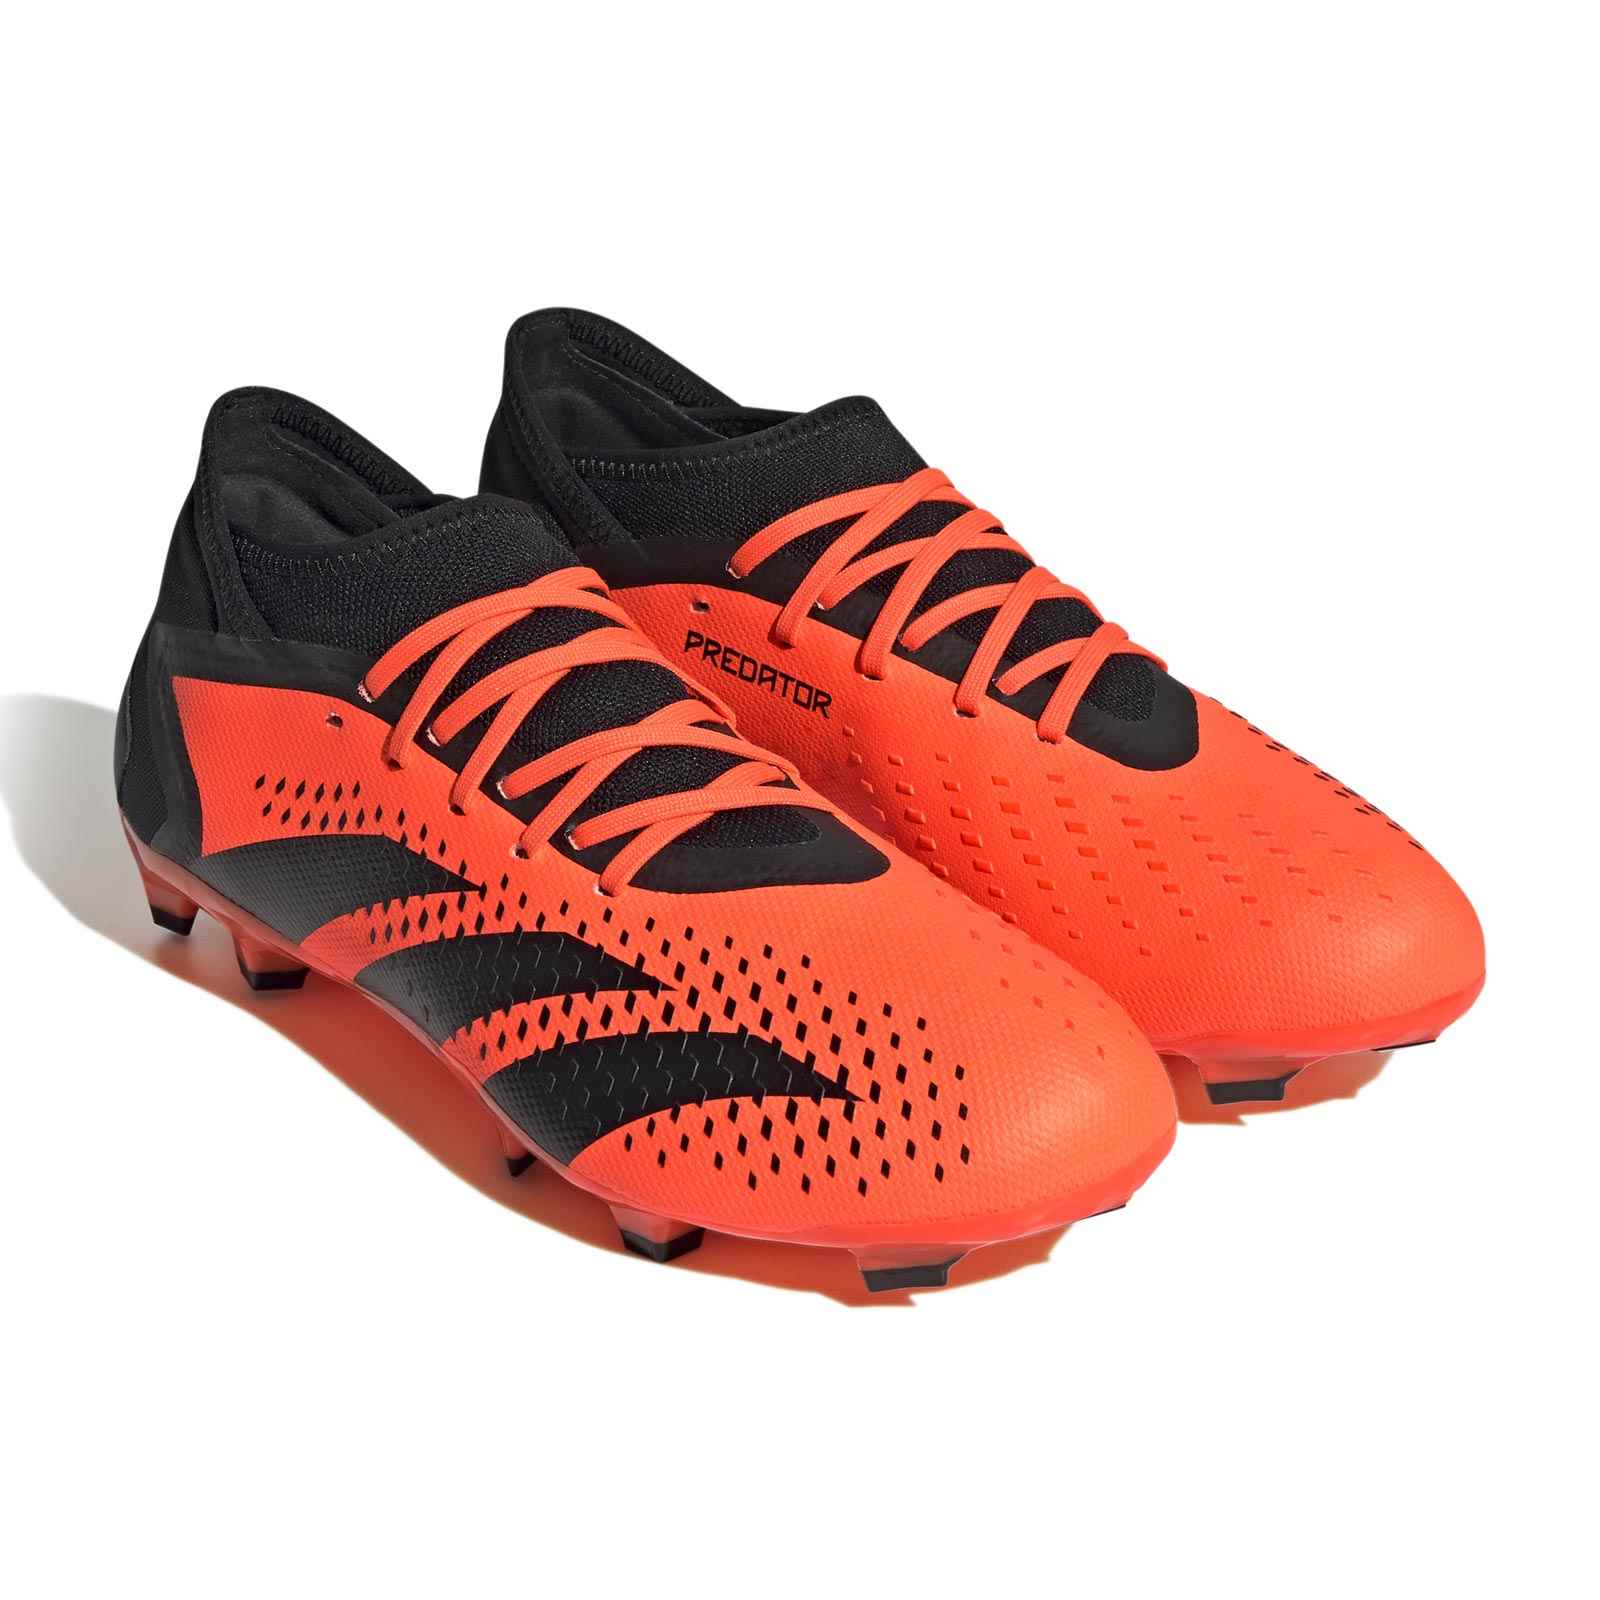 Adidas Predator, Boots By Collection, Football, Elverys